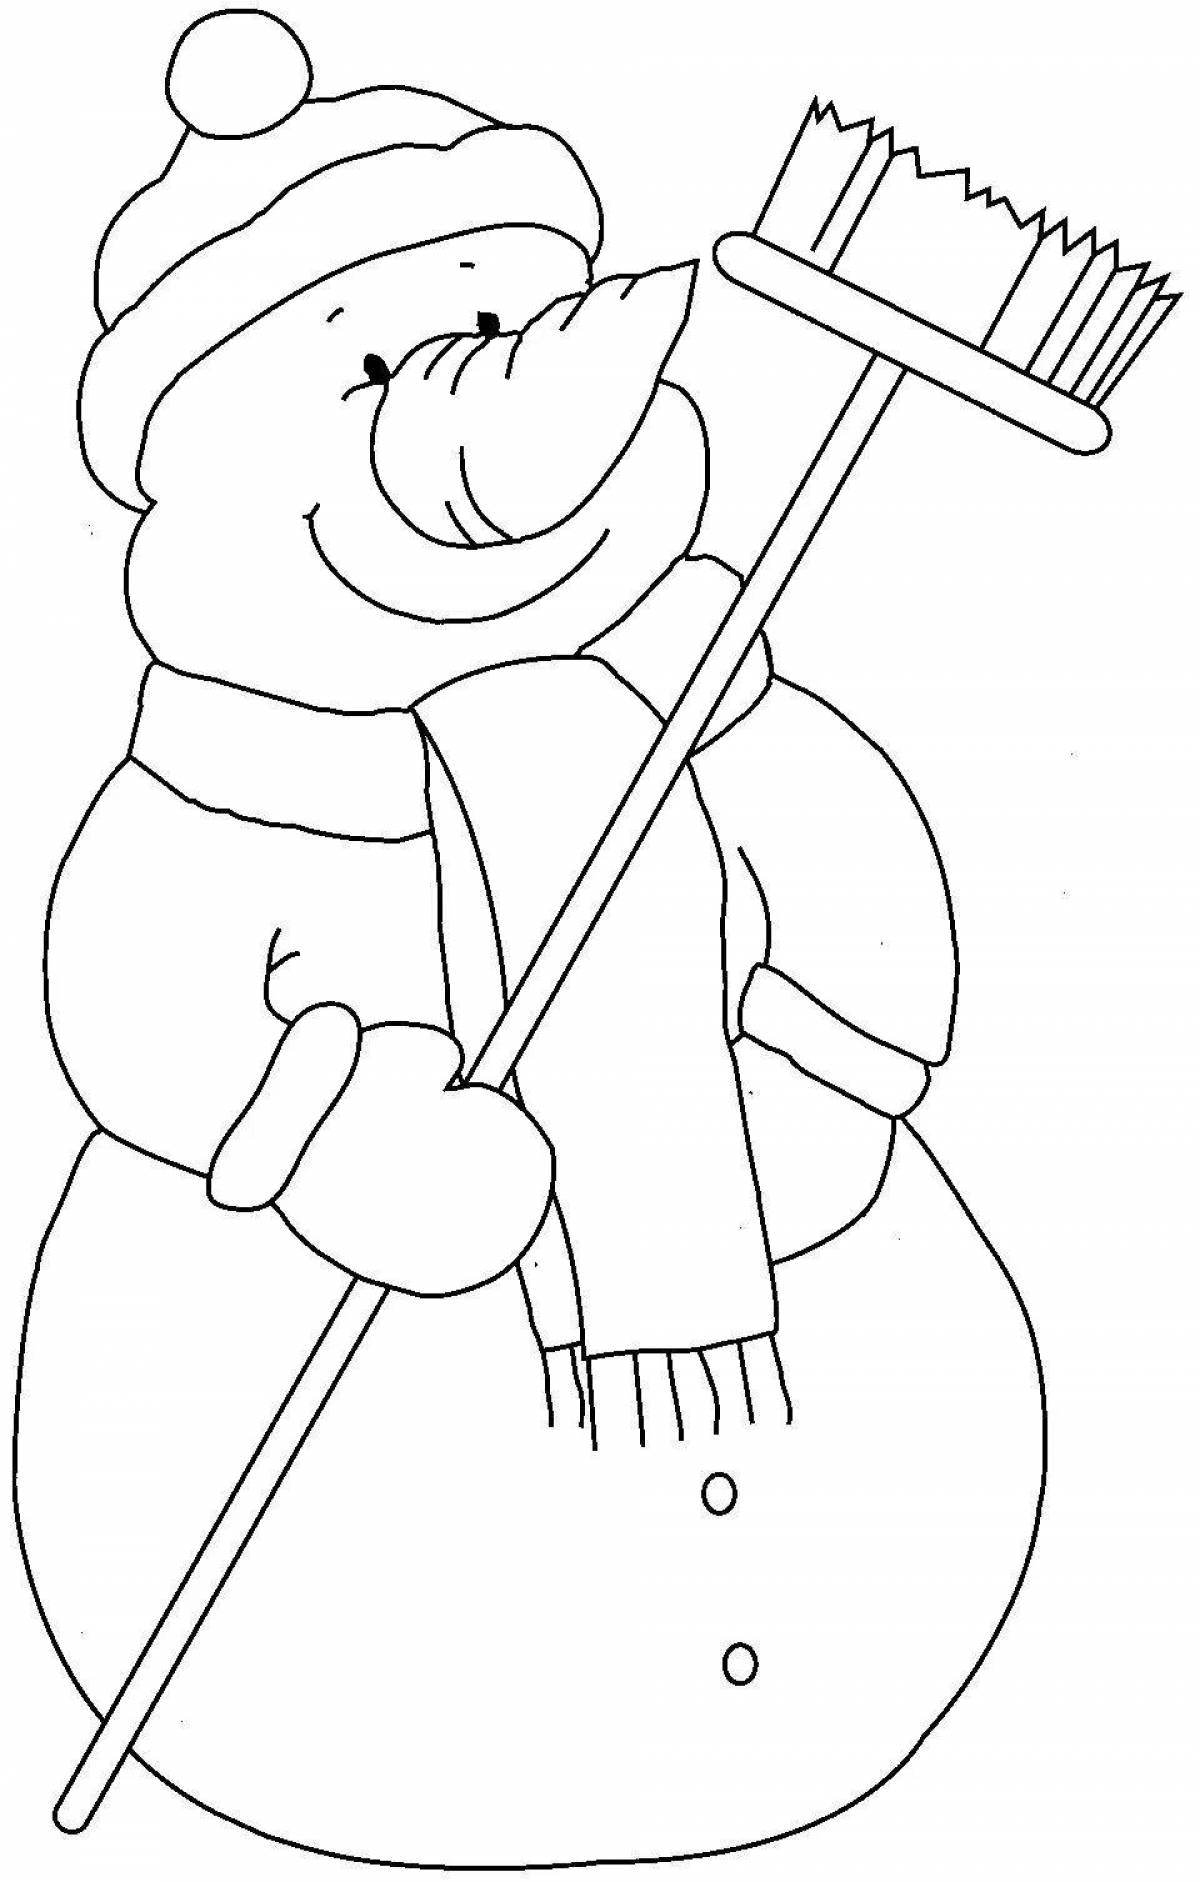 Animated snowman day coloring page